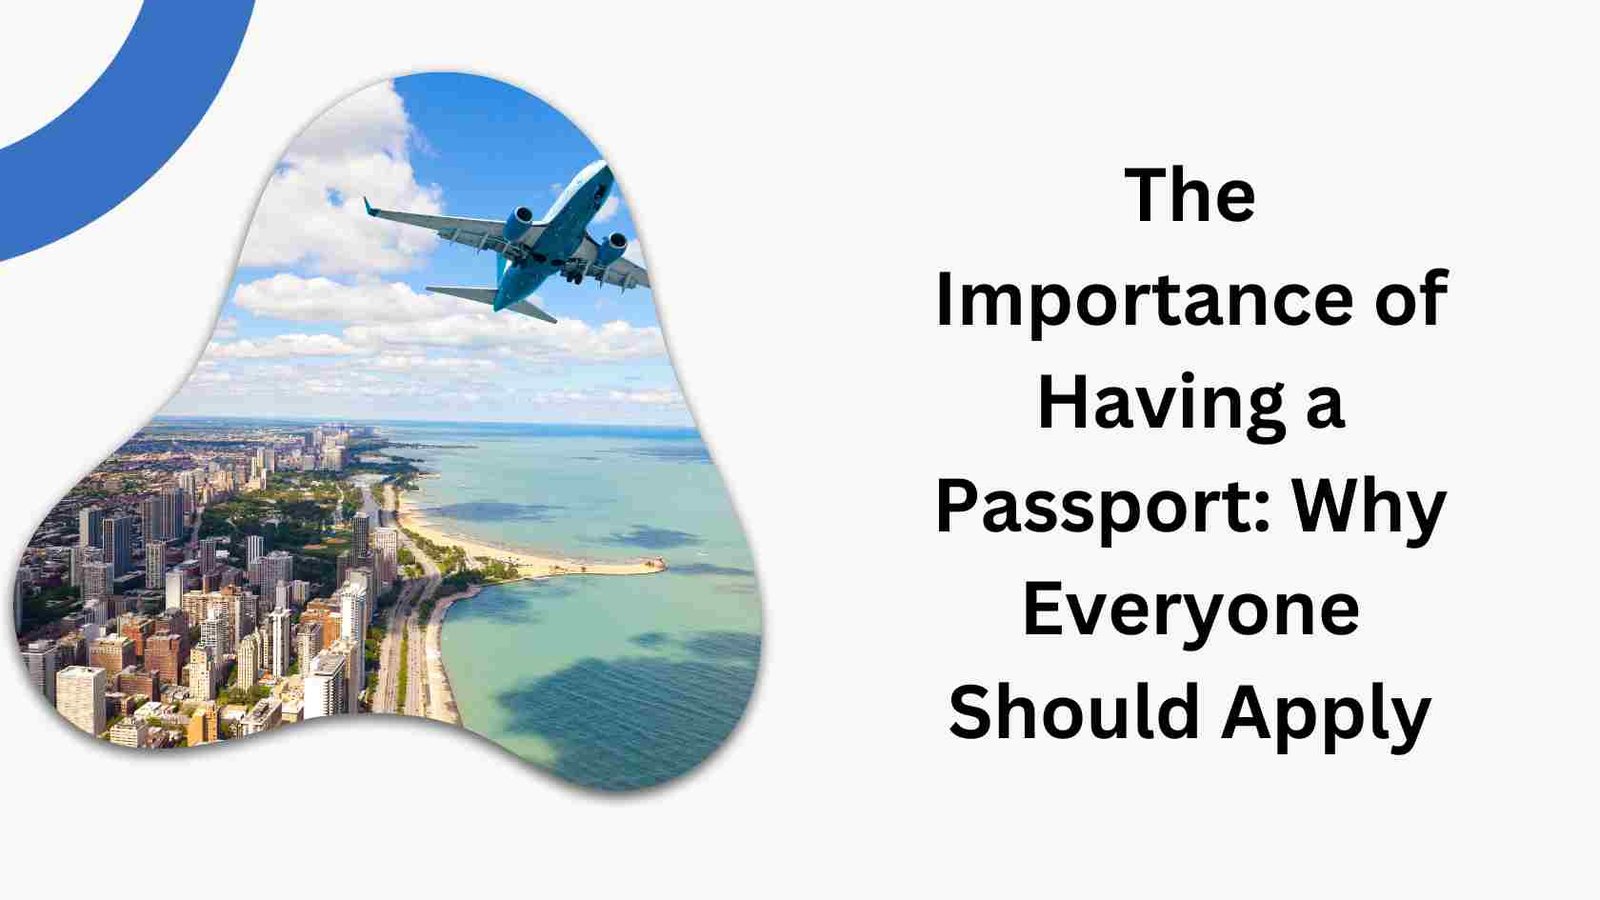 The Importance of Having a Passport Why Everyone Should Apply